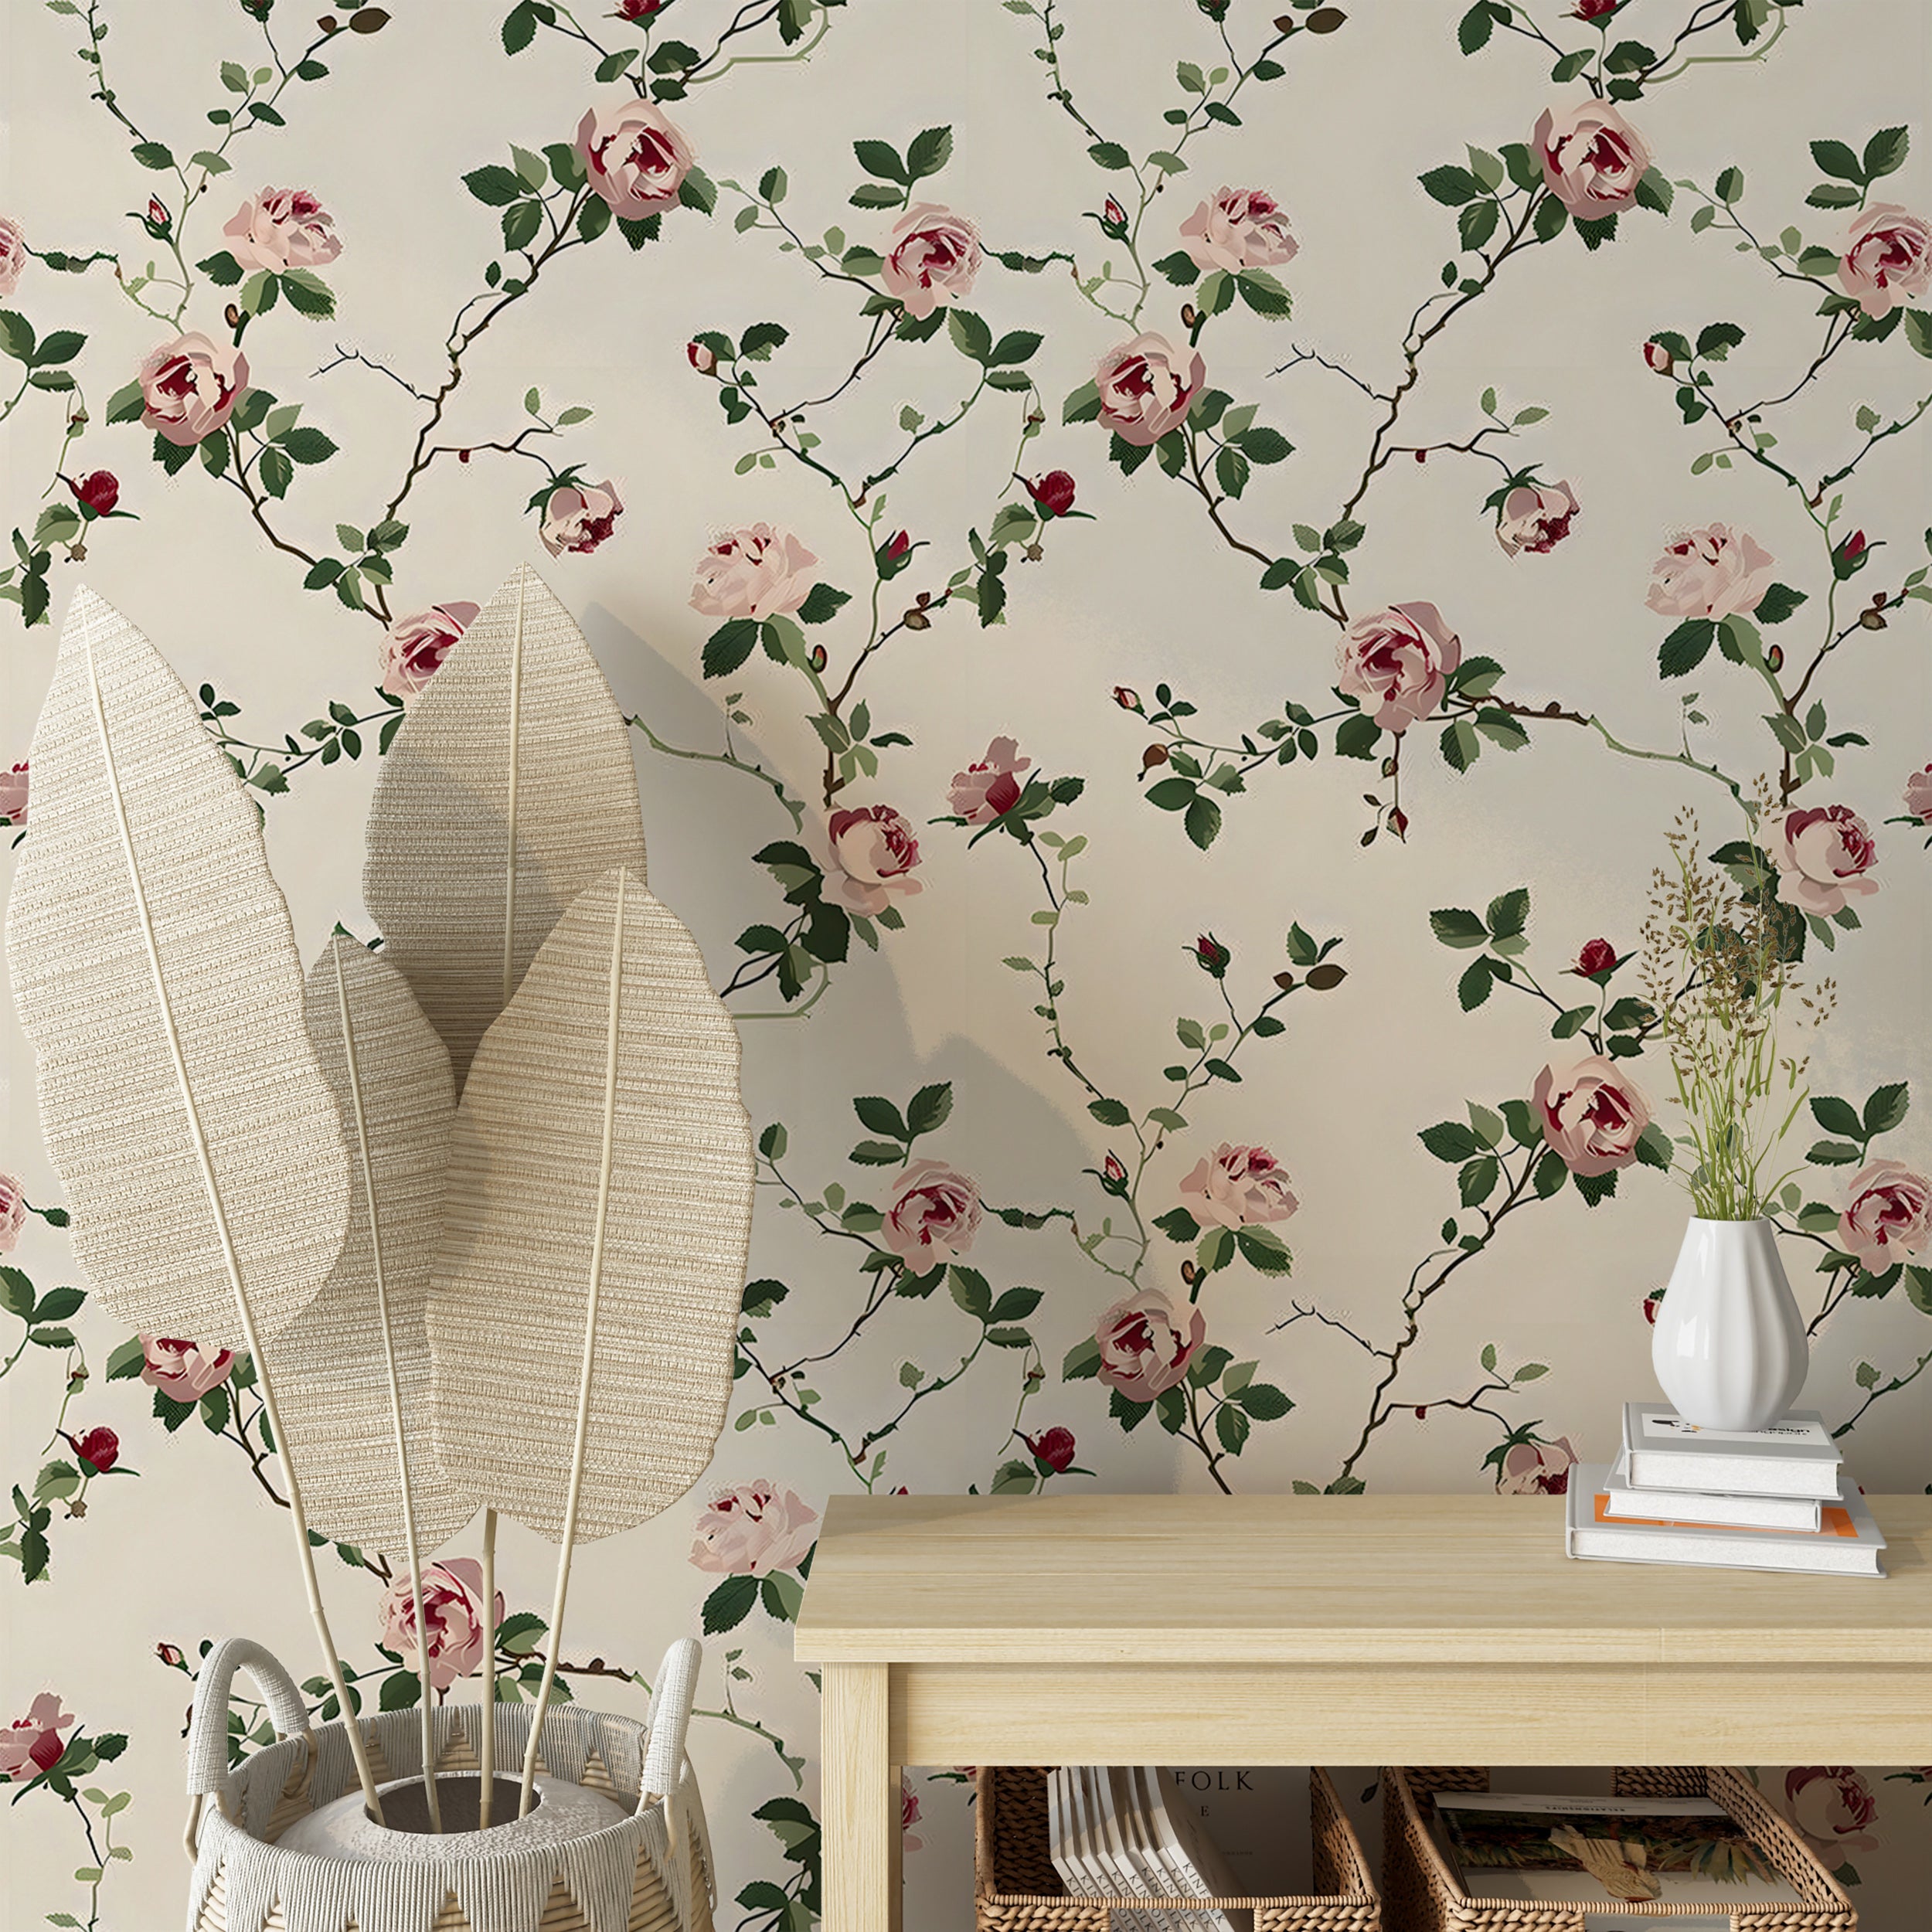 Removable Botanical Wallpaper Decal Soft Pink Roses Wall Decor